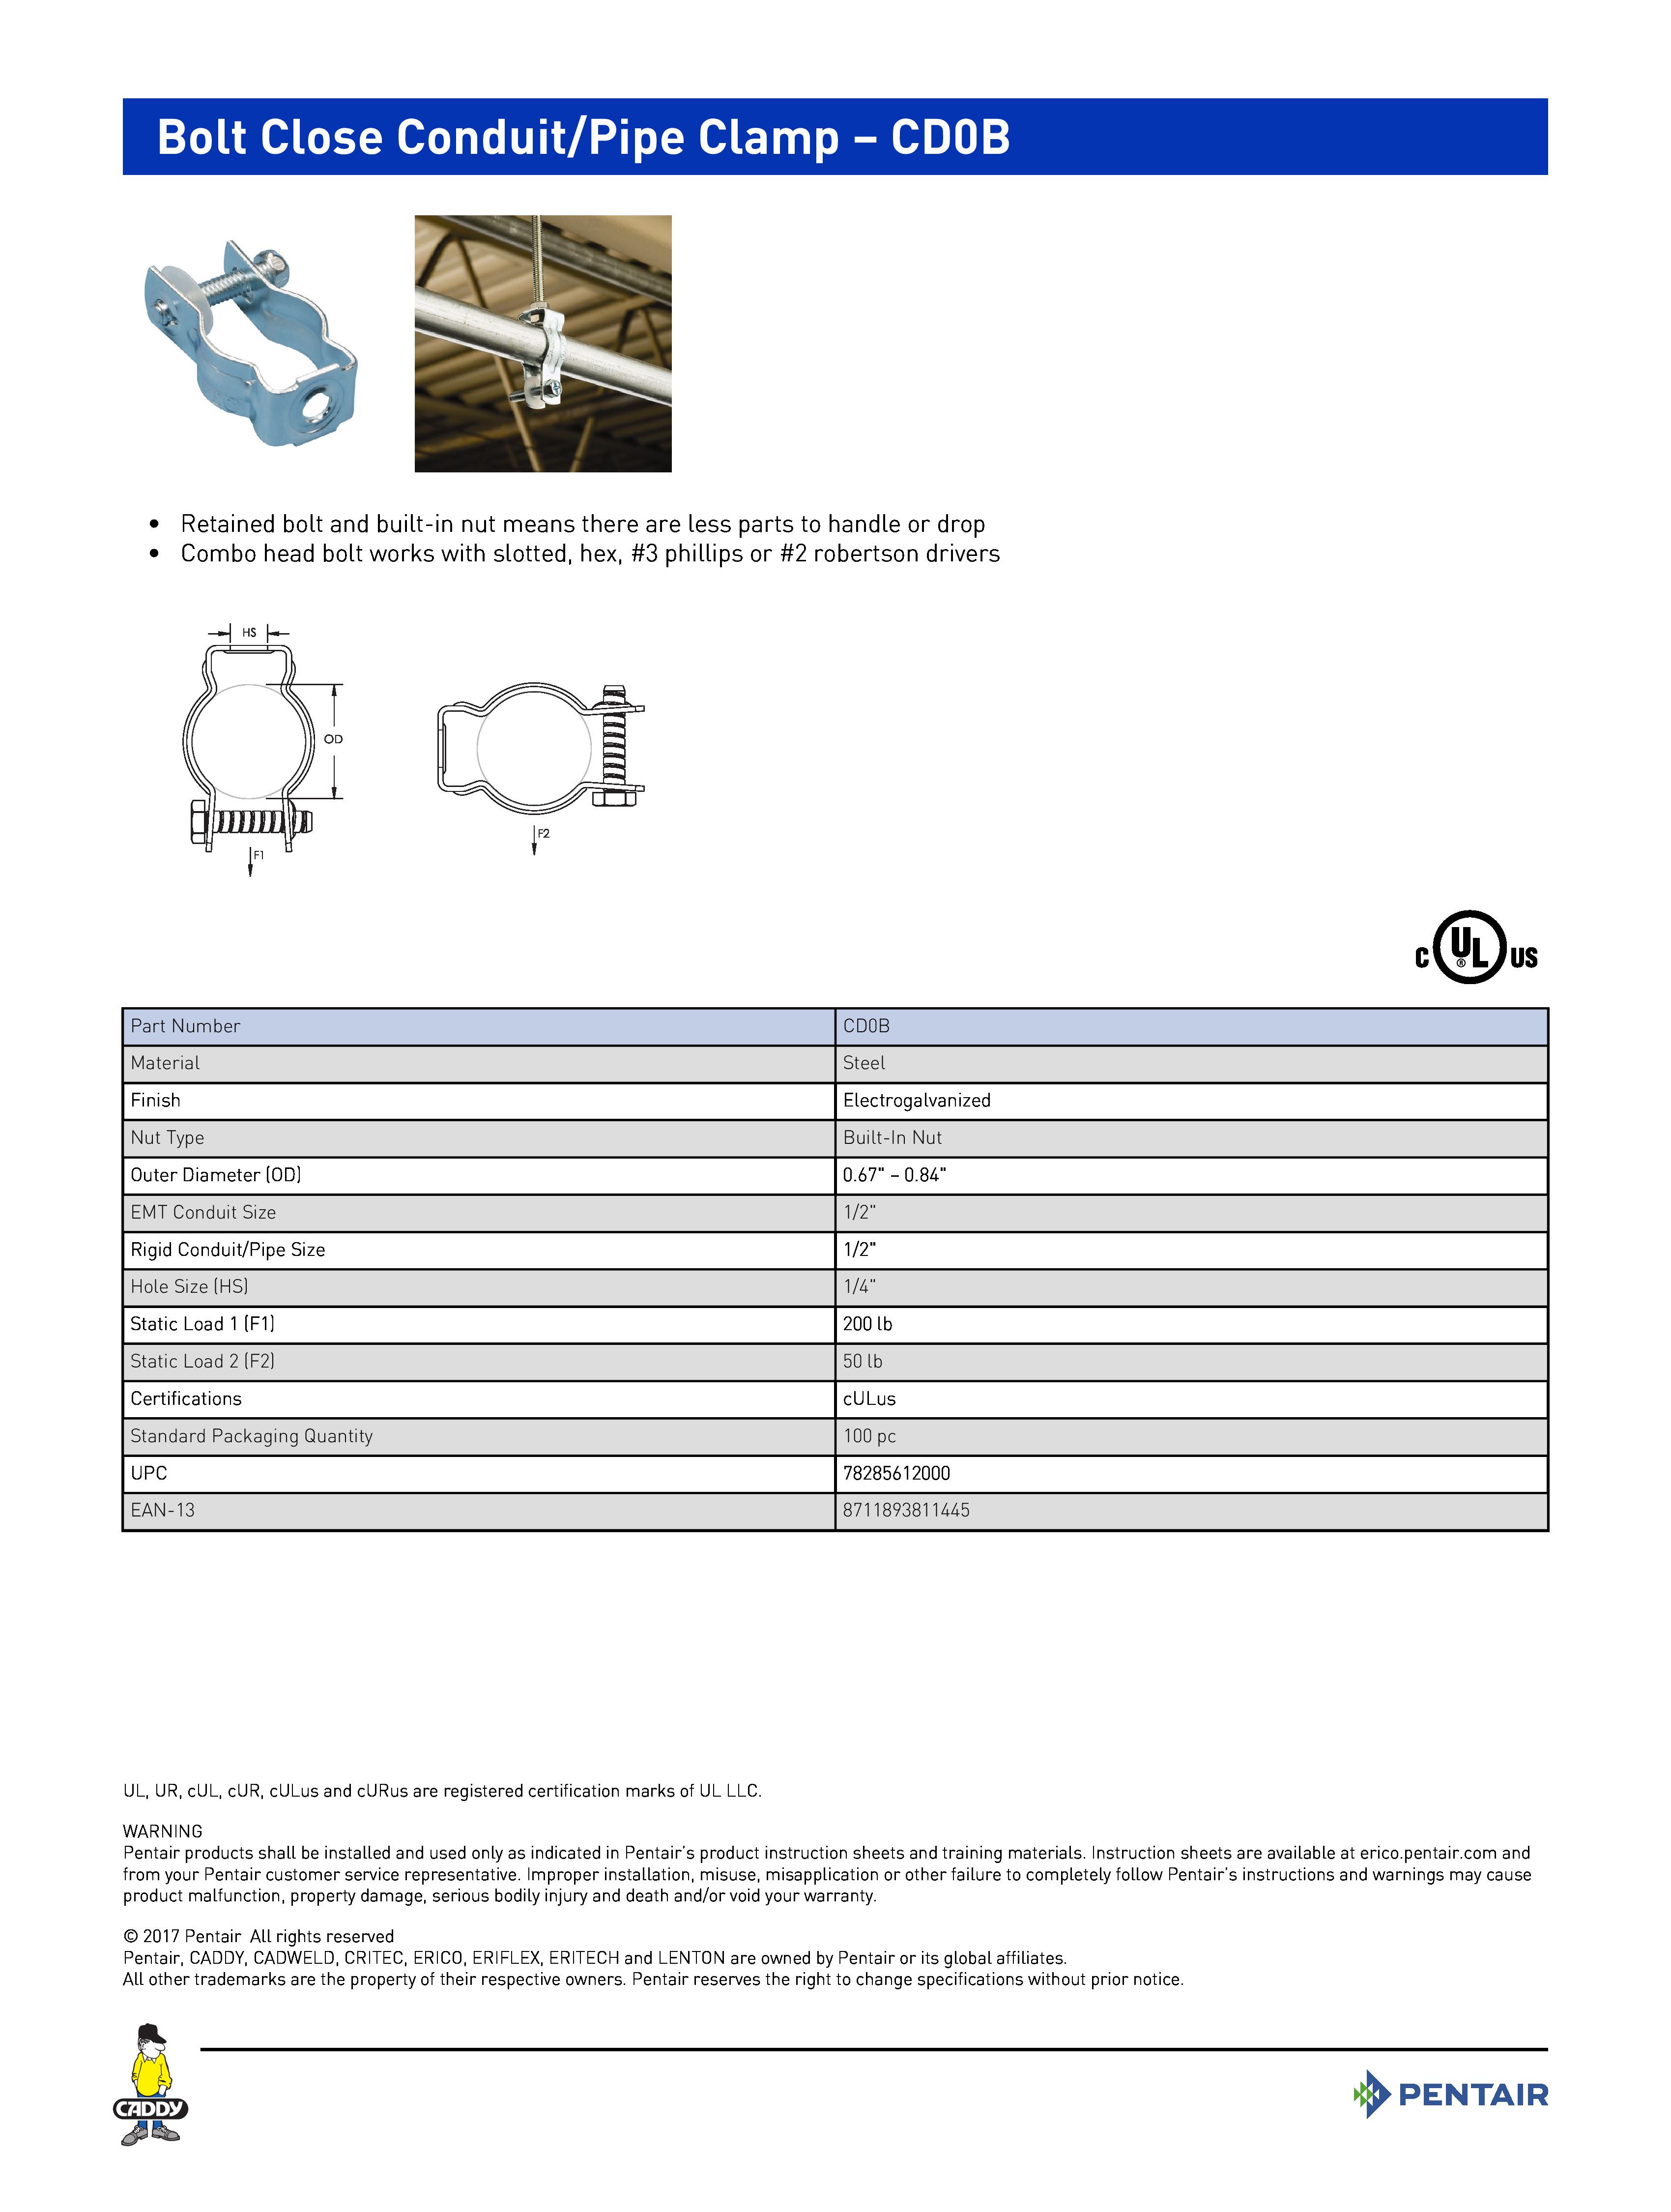 Bolt Close Conduit/Pipe Clamp – CD0B	
 	
•	Retained bolt and built-in nut means there are less parts to handle or drop	
•	Combo head bolt works with slotted, hex, #3 phillips or #2 robertson drivers	
 	
Part NumberCD0BMaterialSteelFinishElectrogalvanizedNut TypeBuilt-In NutOuter Diameter (OD)0.67" – 0.84"EMT Conduit Size1/2"Rigid Conduit/Pipe Size1/2"Hole Size (HS)1/4"Static Load 1 (F1)200 lbStatic Load 2 (F2)50 lbCertificationscULusStandard Packaging Quantity100 pcUPC78285612000EAN-138711893811445
UL, UR, cUL, cUR, cULus and cURus are registered certification marks of UL LLC. WARNINGPentair products shall be installed and used only as indicated in Pentair’s product instruction sheets and training materials. Instruction sheets are available at erico.pentair.com andfrom your Pentair customer service representative. Improper installation, misuse, misapplication or other failure to completely follow Pentair’s instructions and warnings may causeproduct malfunction, property damage, serious bodily injury and death and/or void your warranty. 